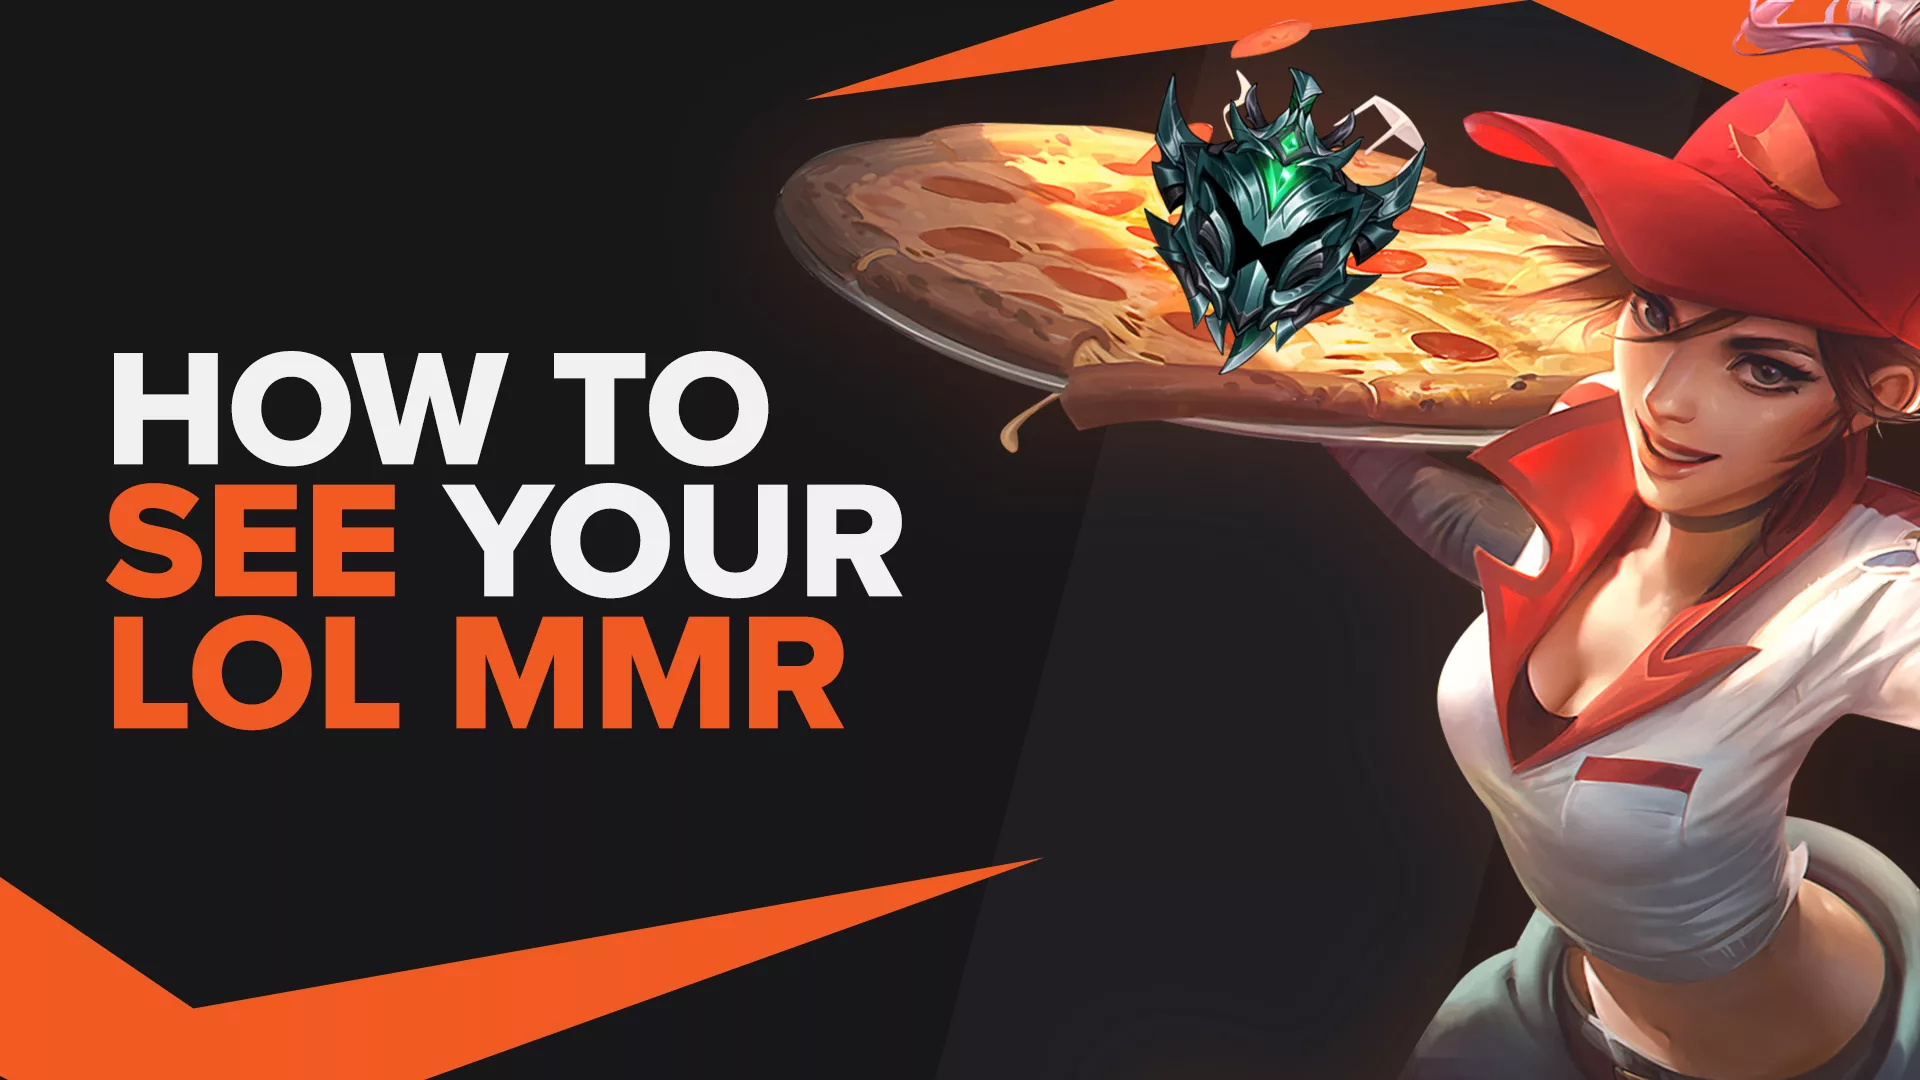 How to See MMR in League of Legends